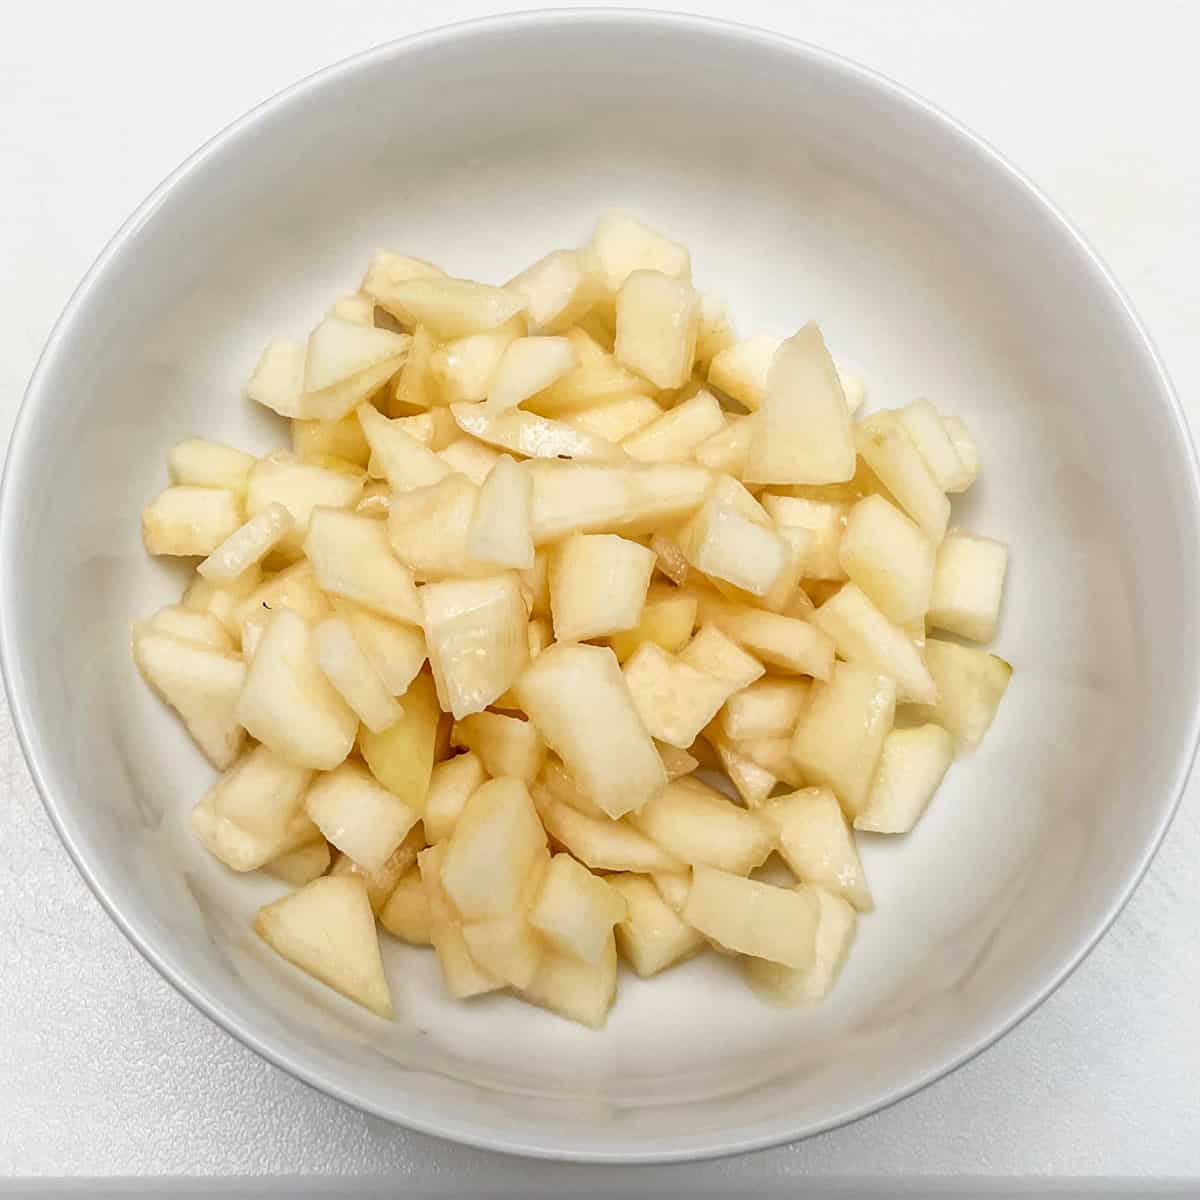 Diced pears in a bowl.